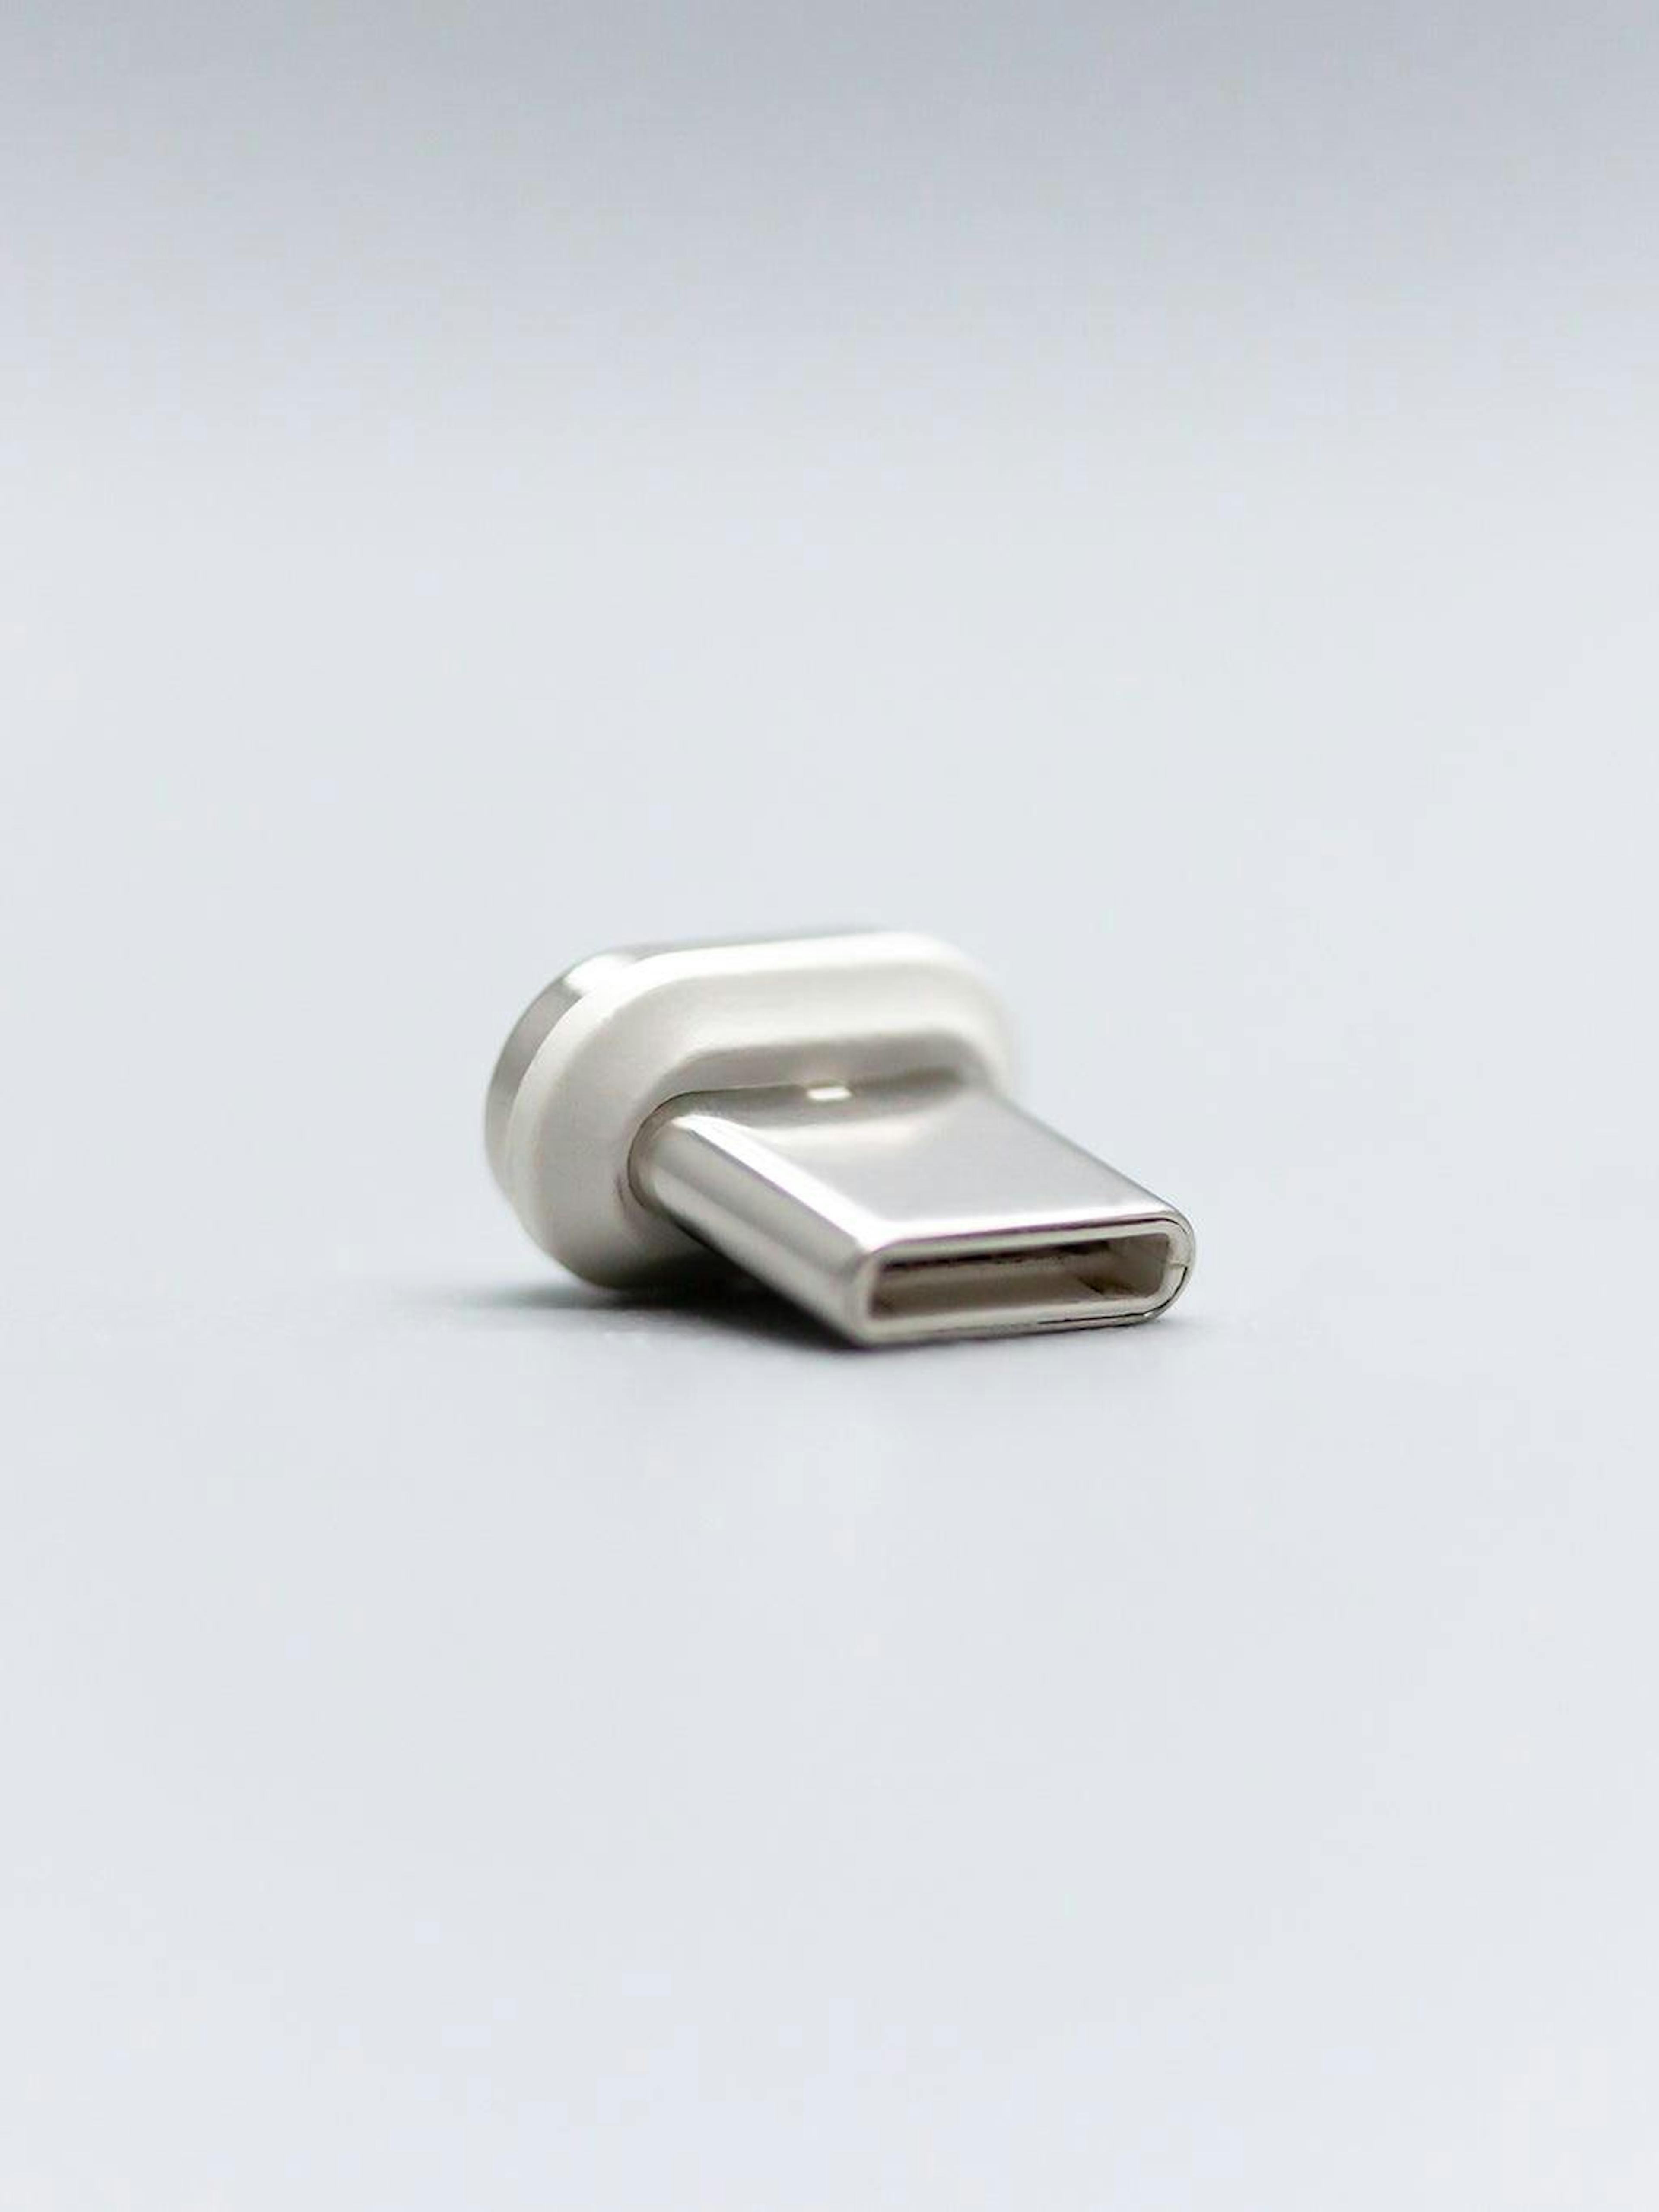 Sustainable Universal Charging Cable | All-in-one